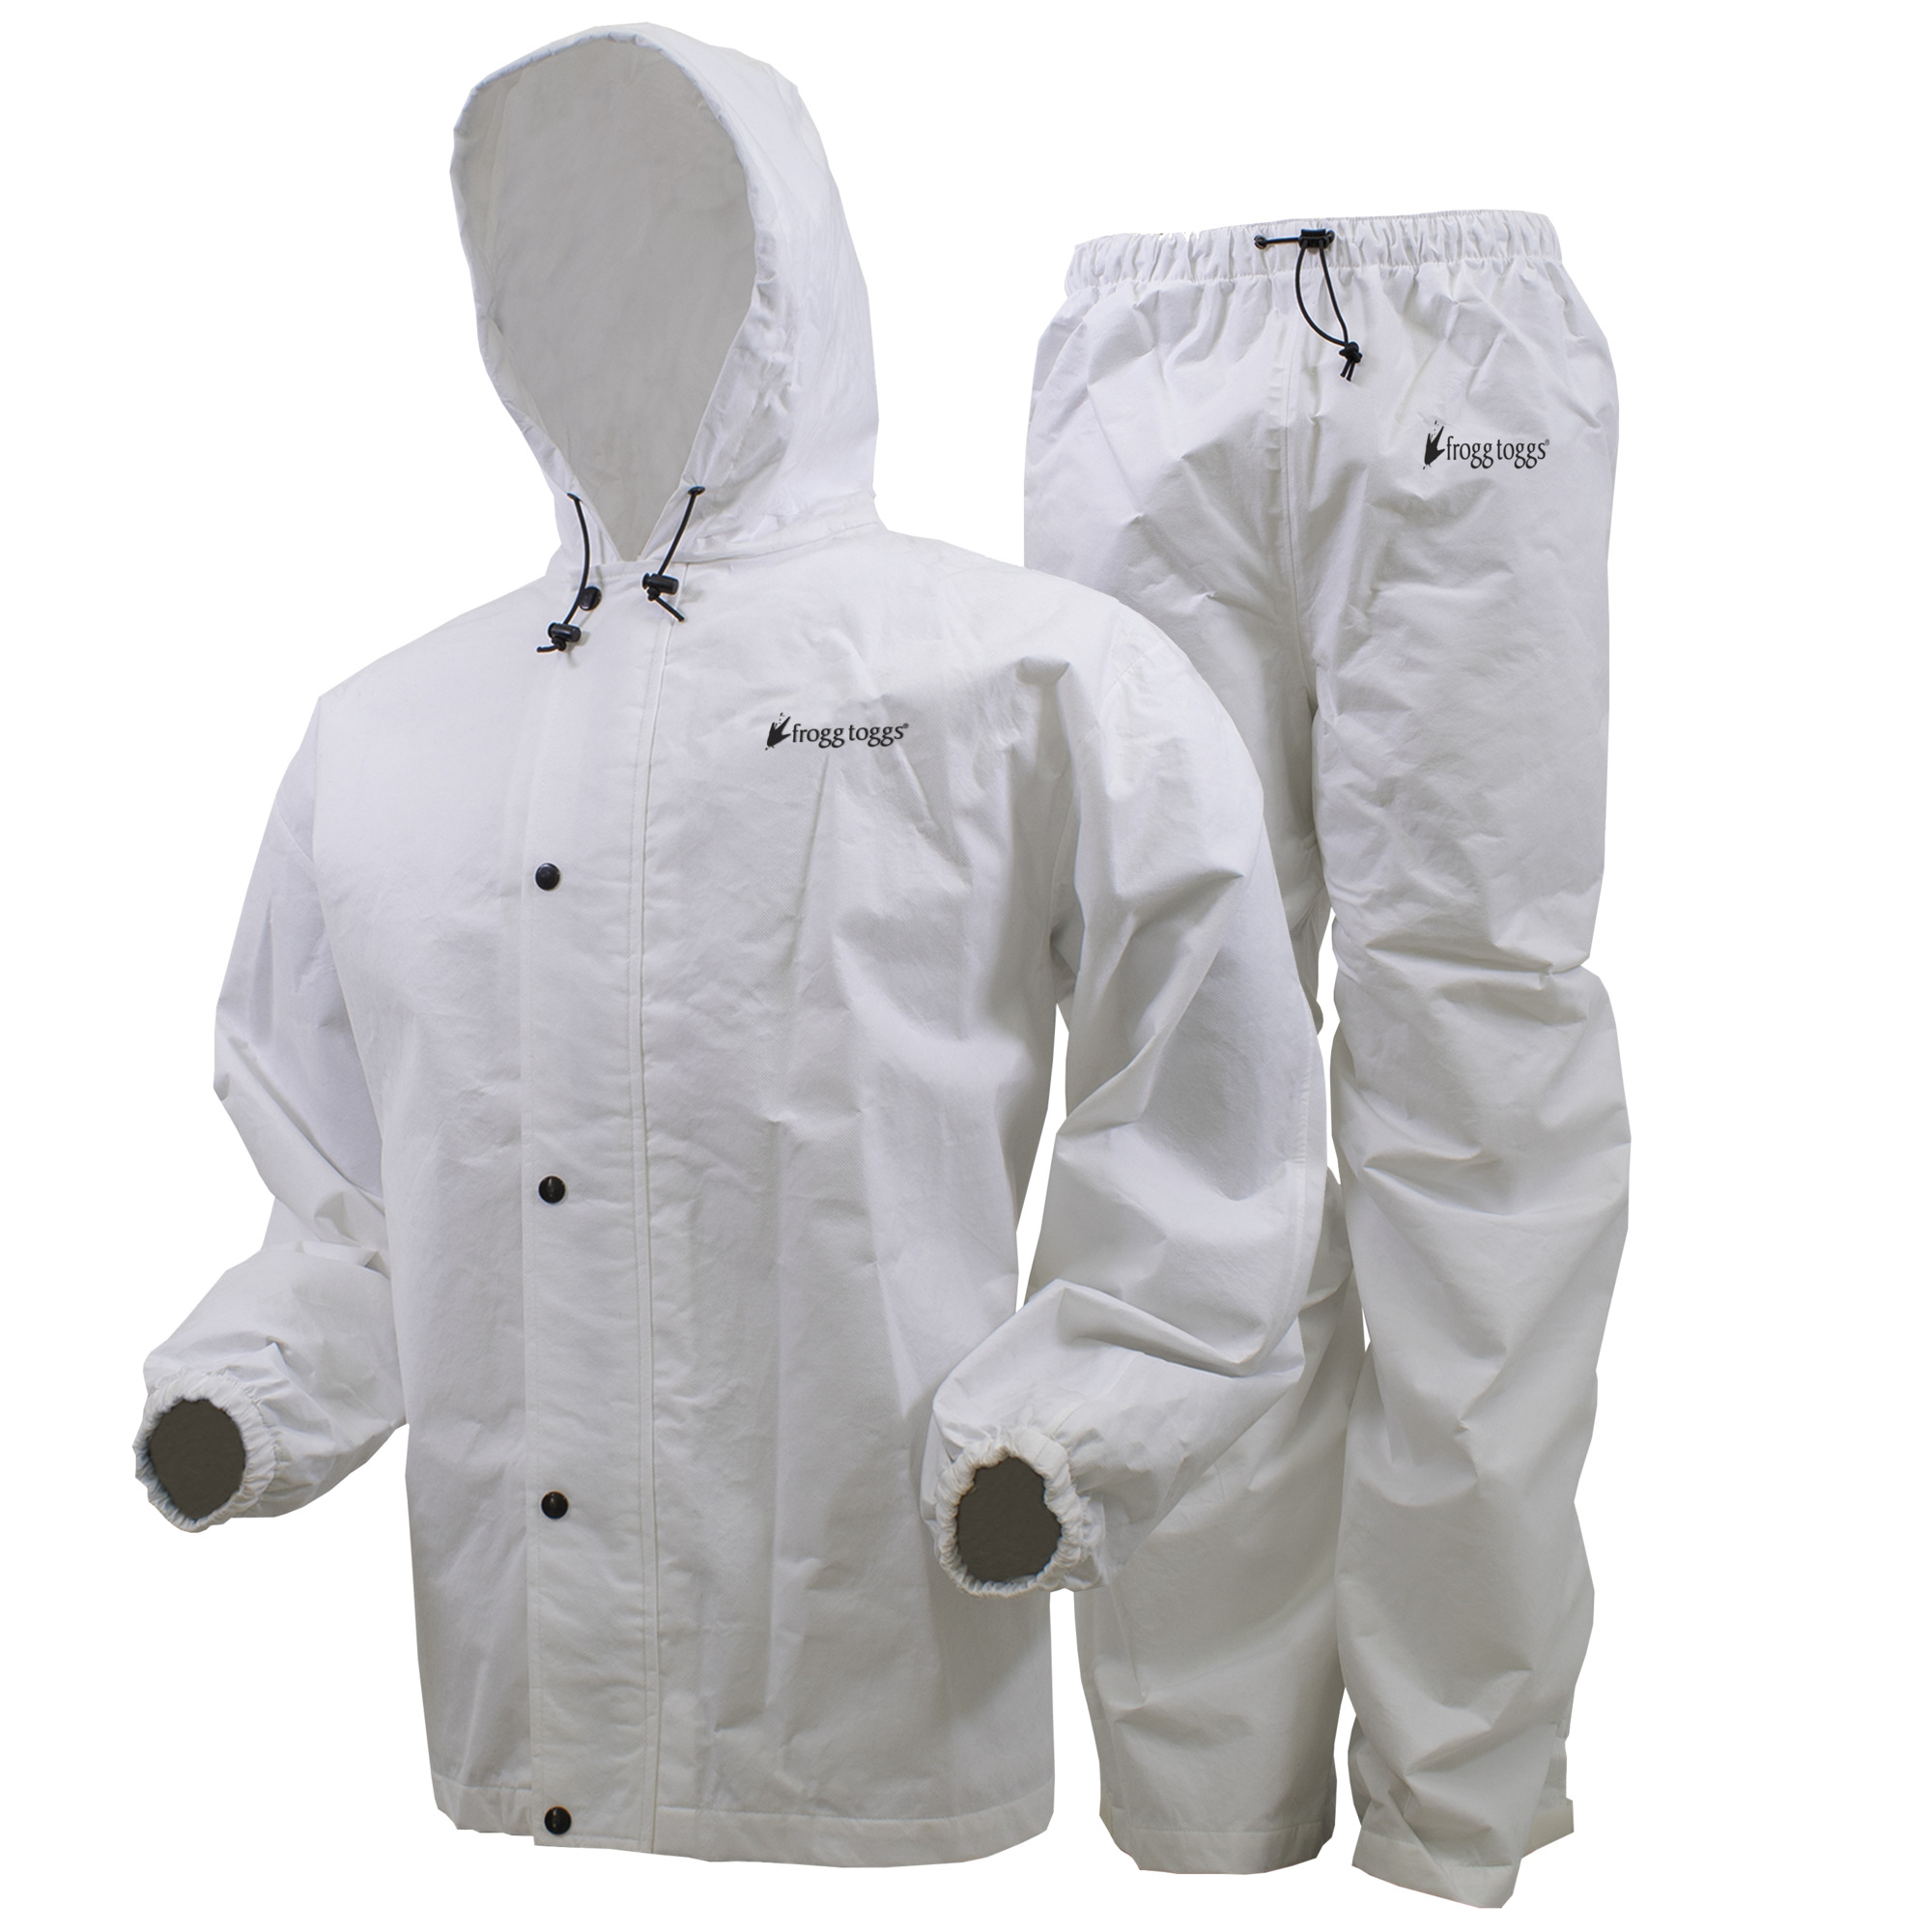 frogg toggs Men's Classic All Sport Rain Suit, 2XL, White, Model AS1310-032X